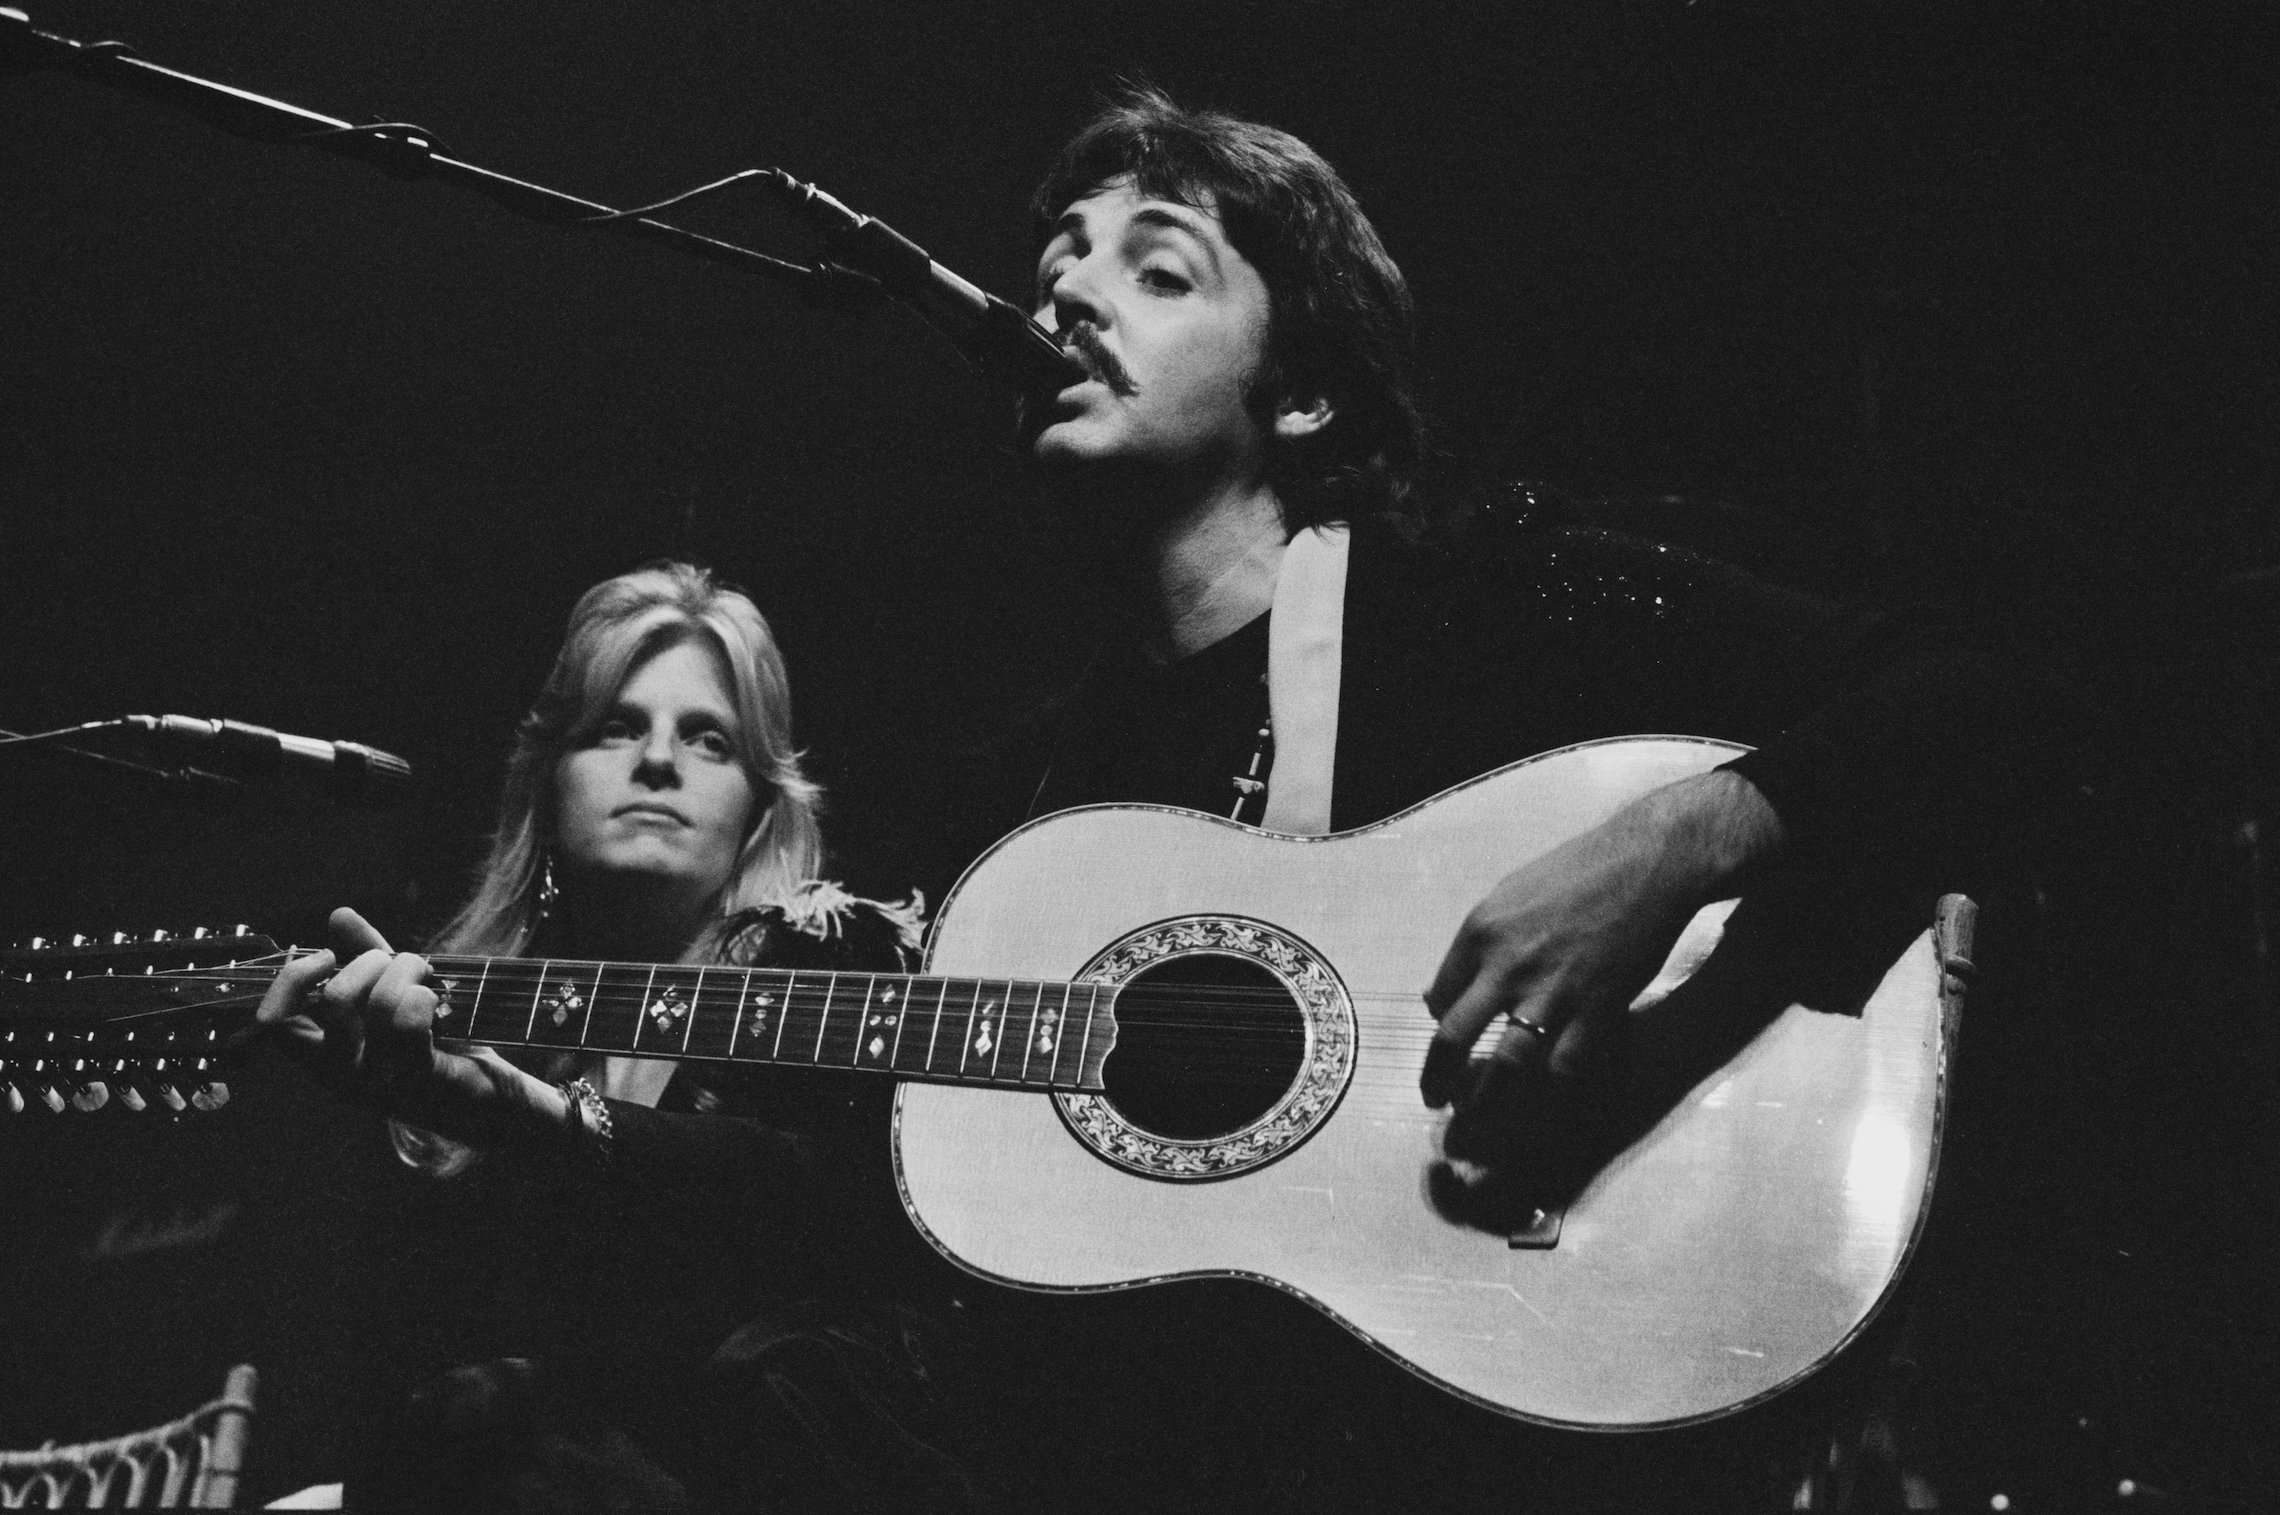 Linda McCartney and Paul McCartney perform during the Wings Over the World tour